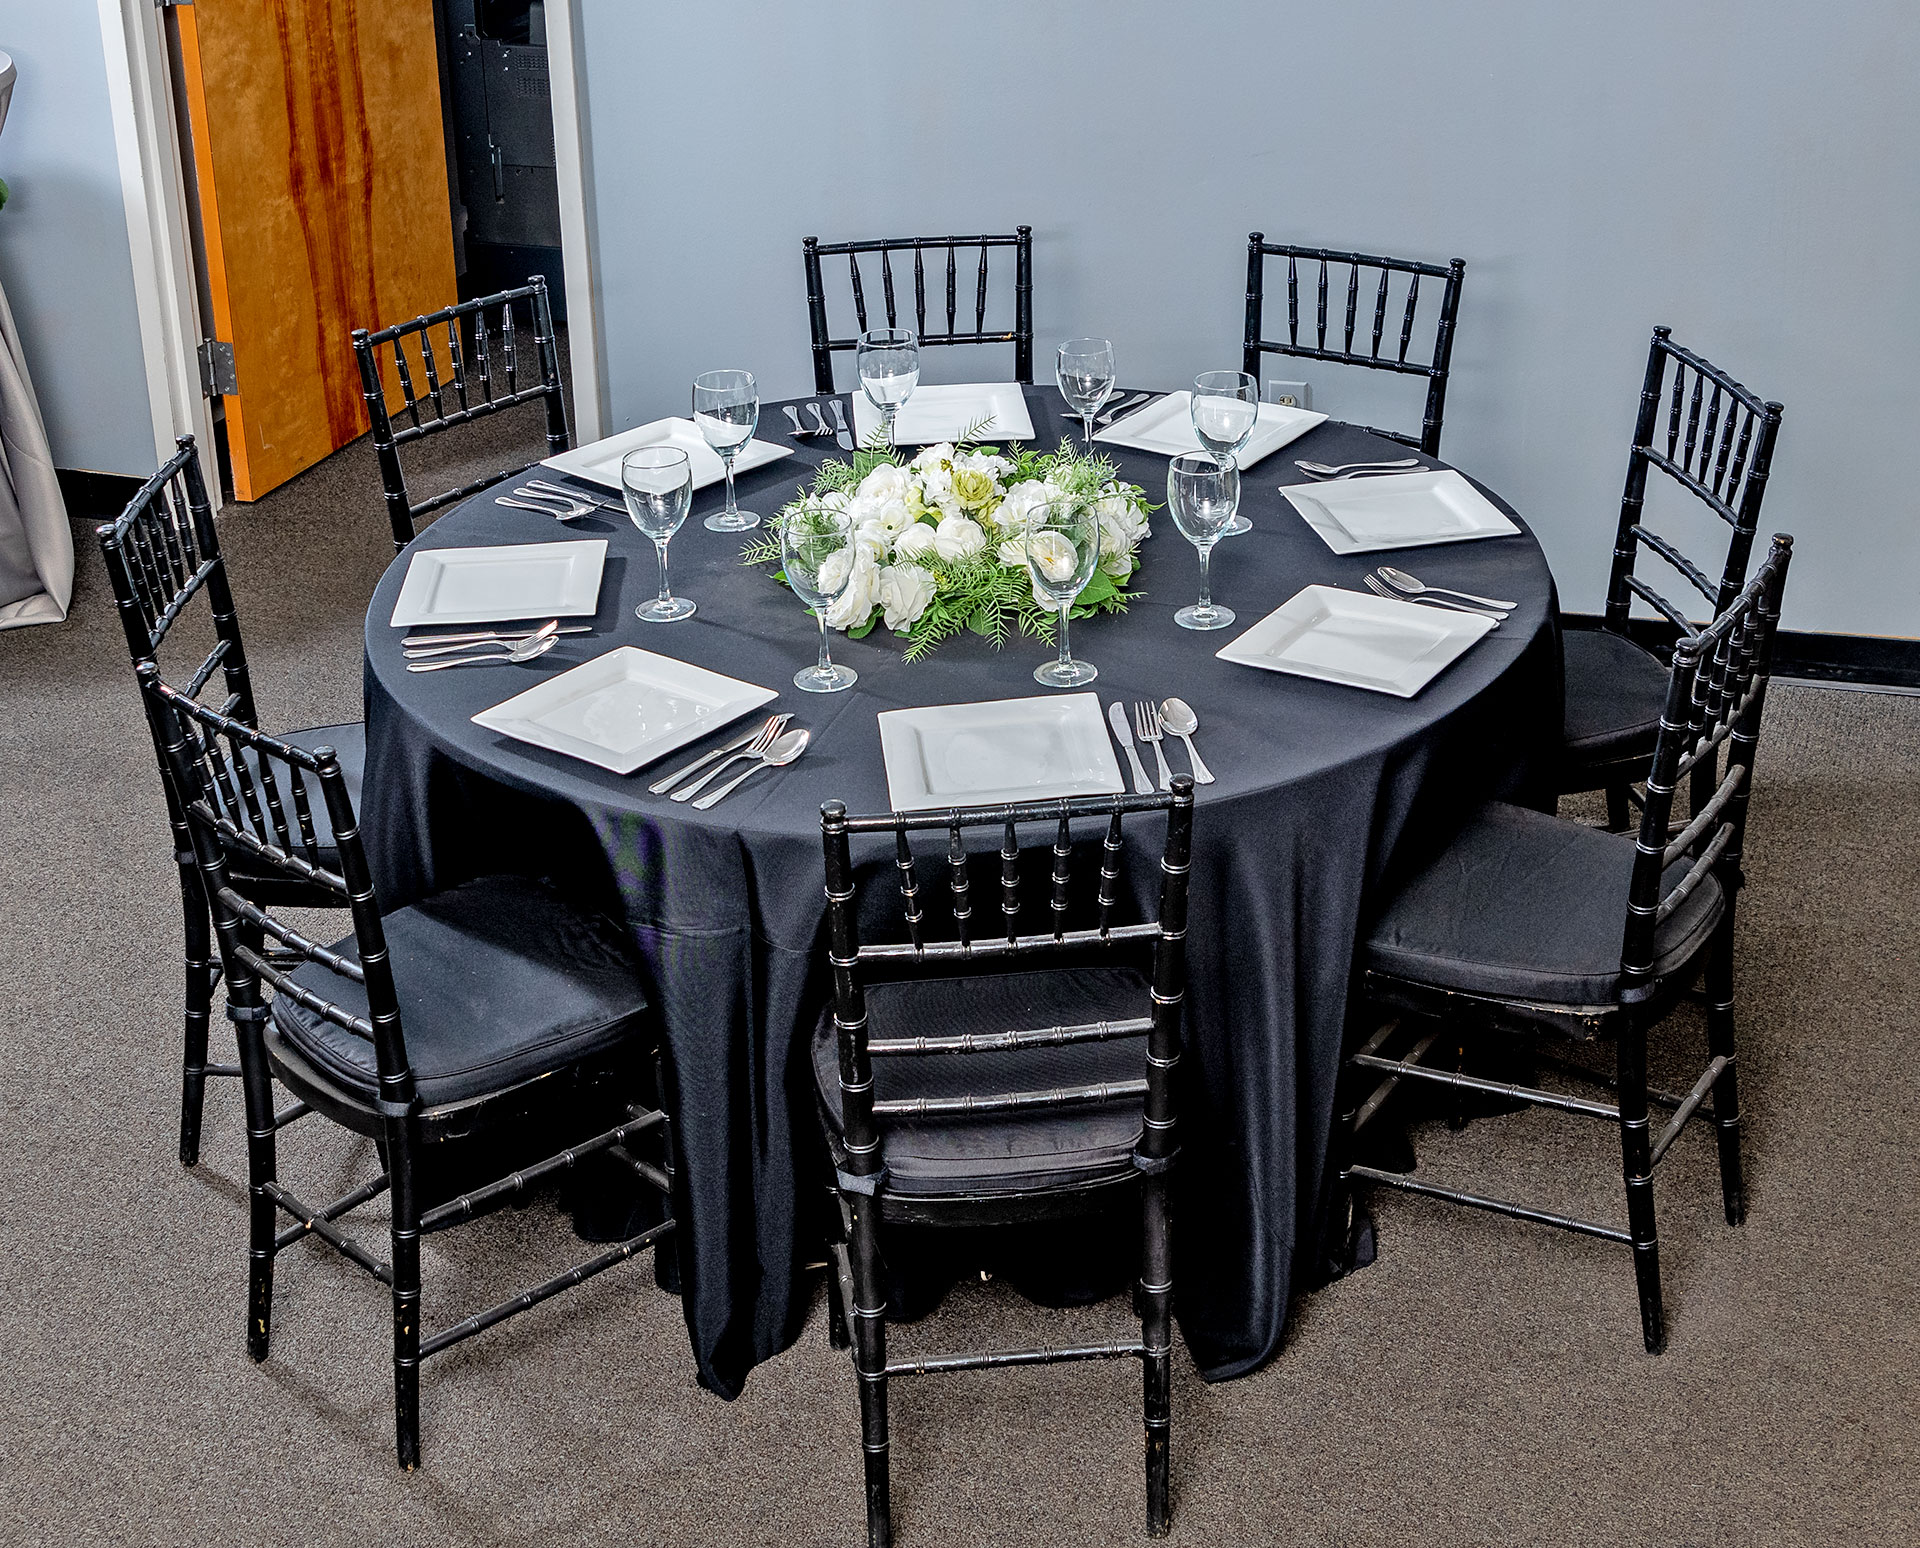 Black Chiavari Chairs around a Round Table with Black Tablecloth and White Square Plates